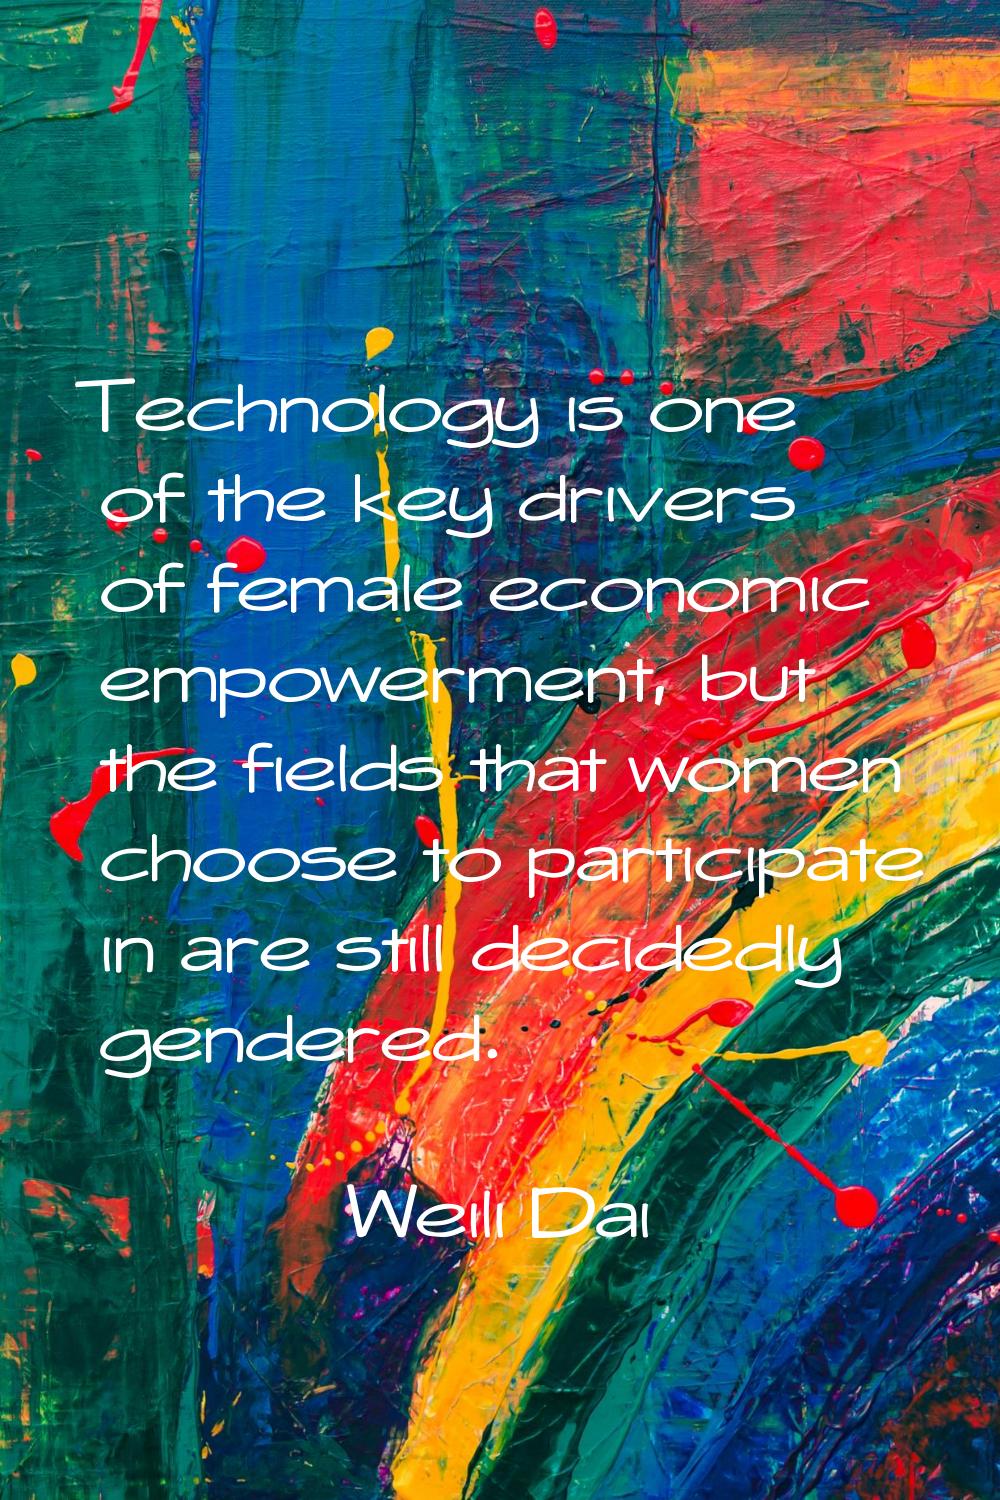 Technology is one of the key drivers of female economic empowerment, but the fields that women choo